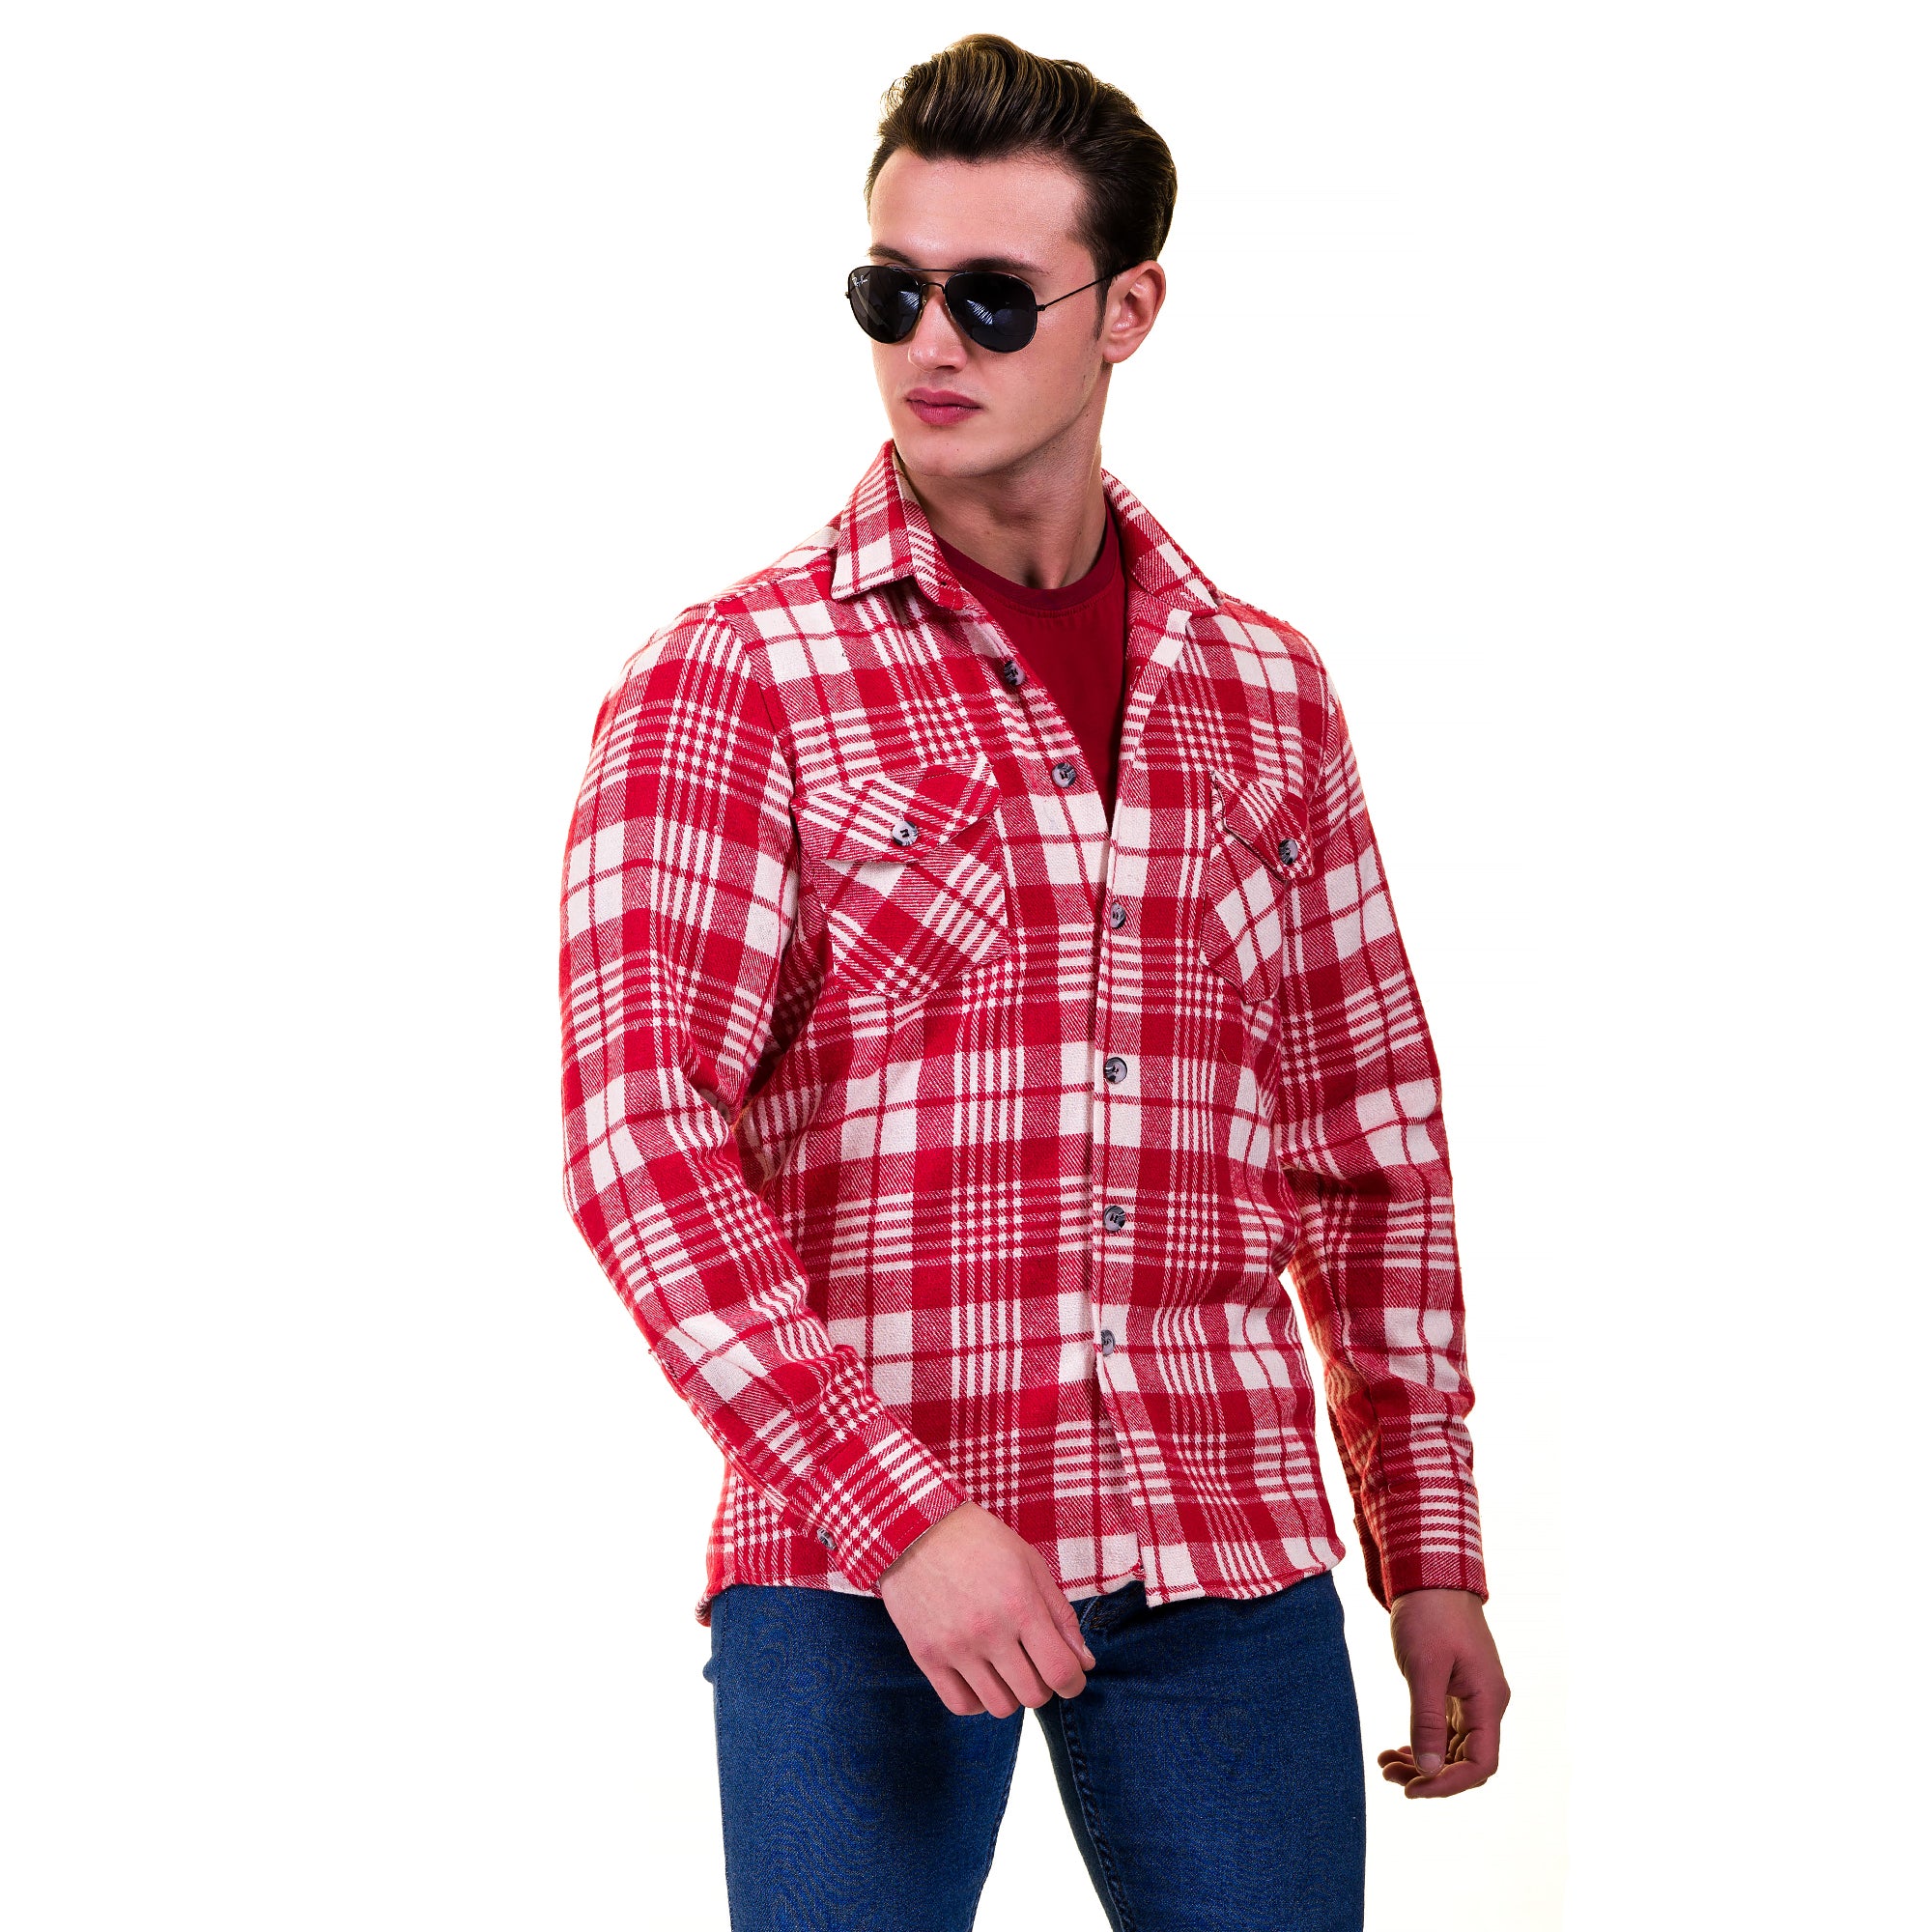 Red White Check Mens Slim Fit Designer Dress Shirt - tailored Cotton Shirts for Work and Casual Wear